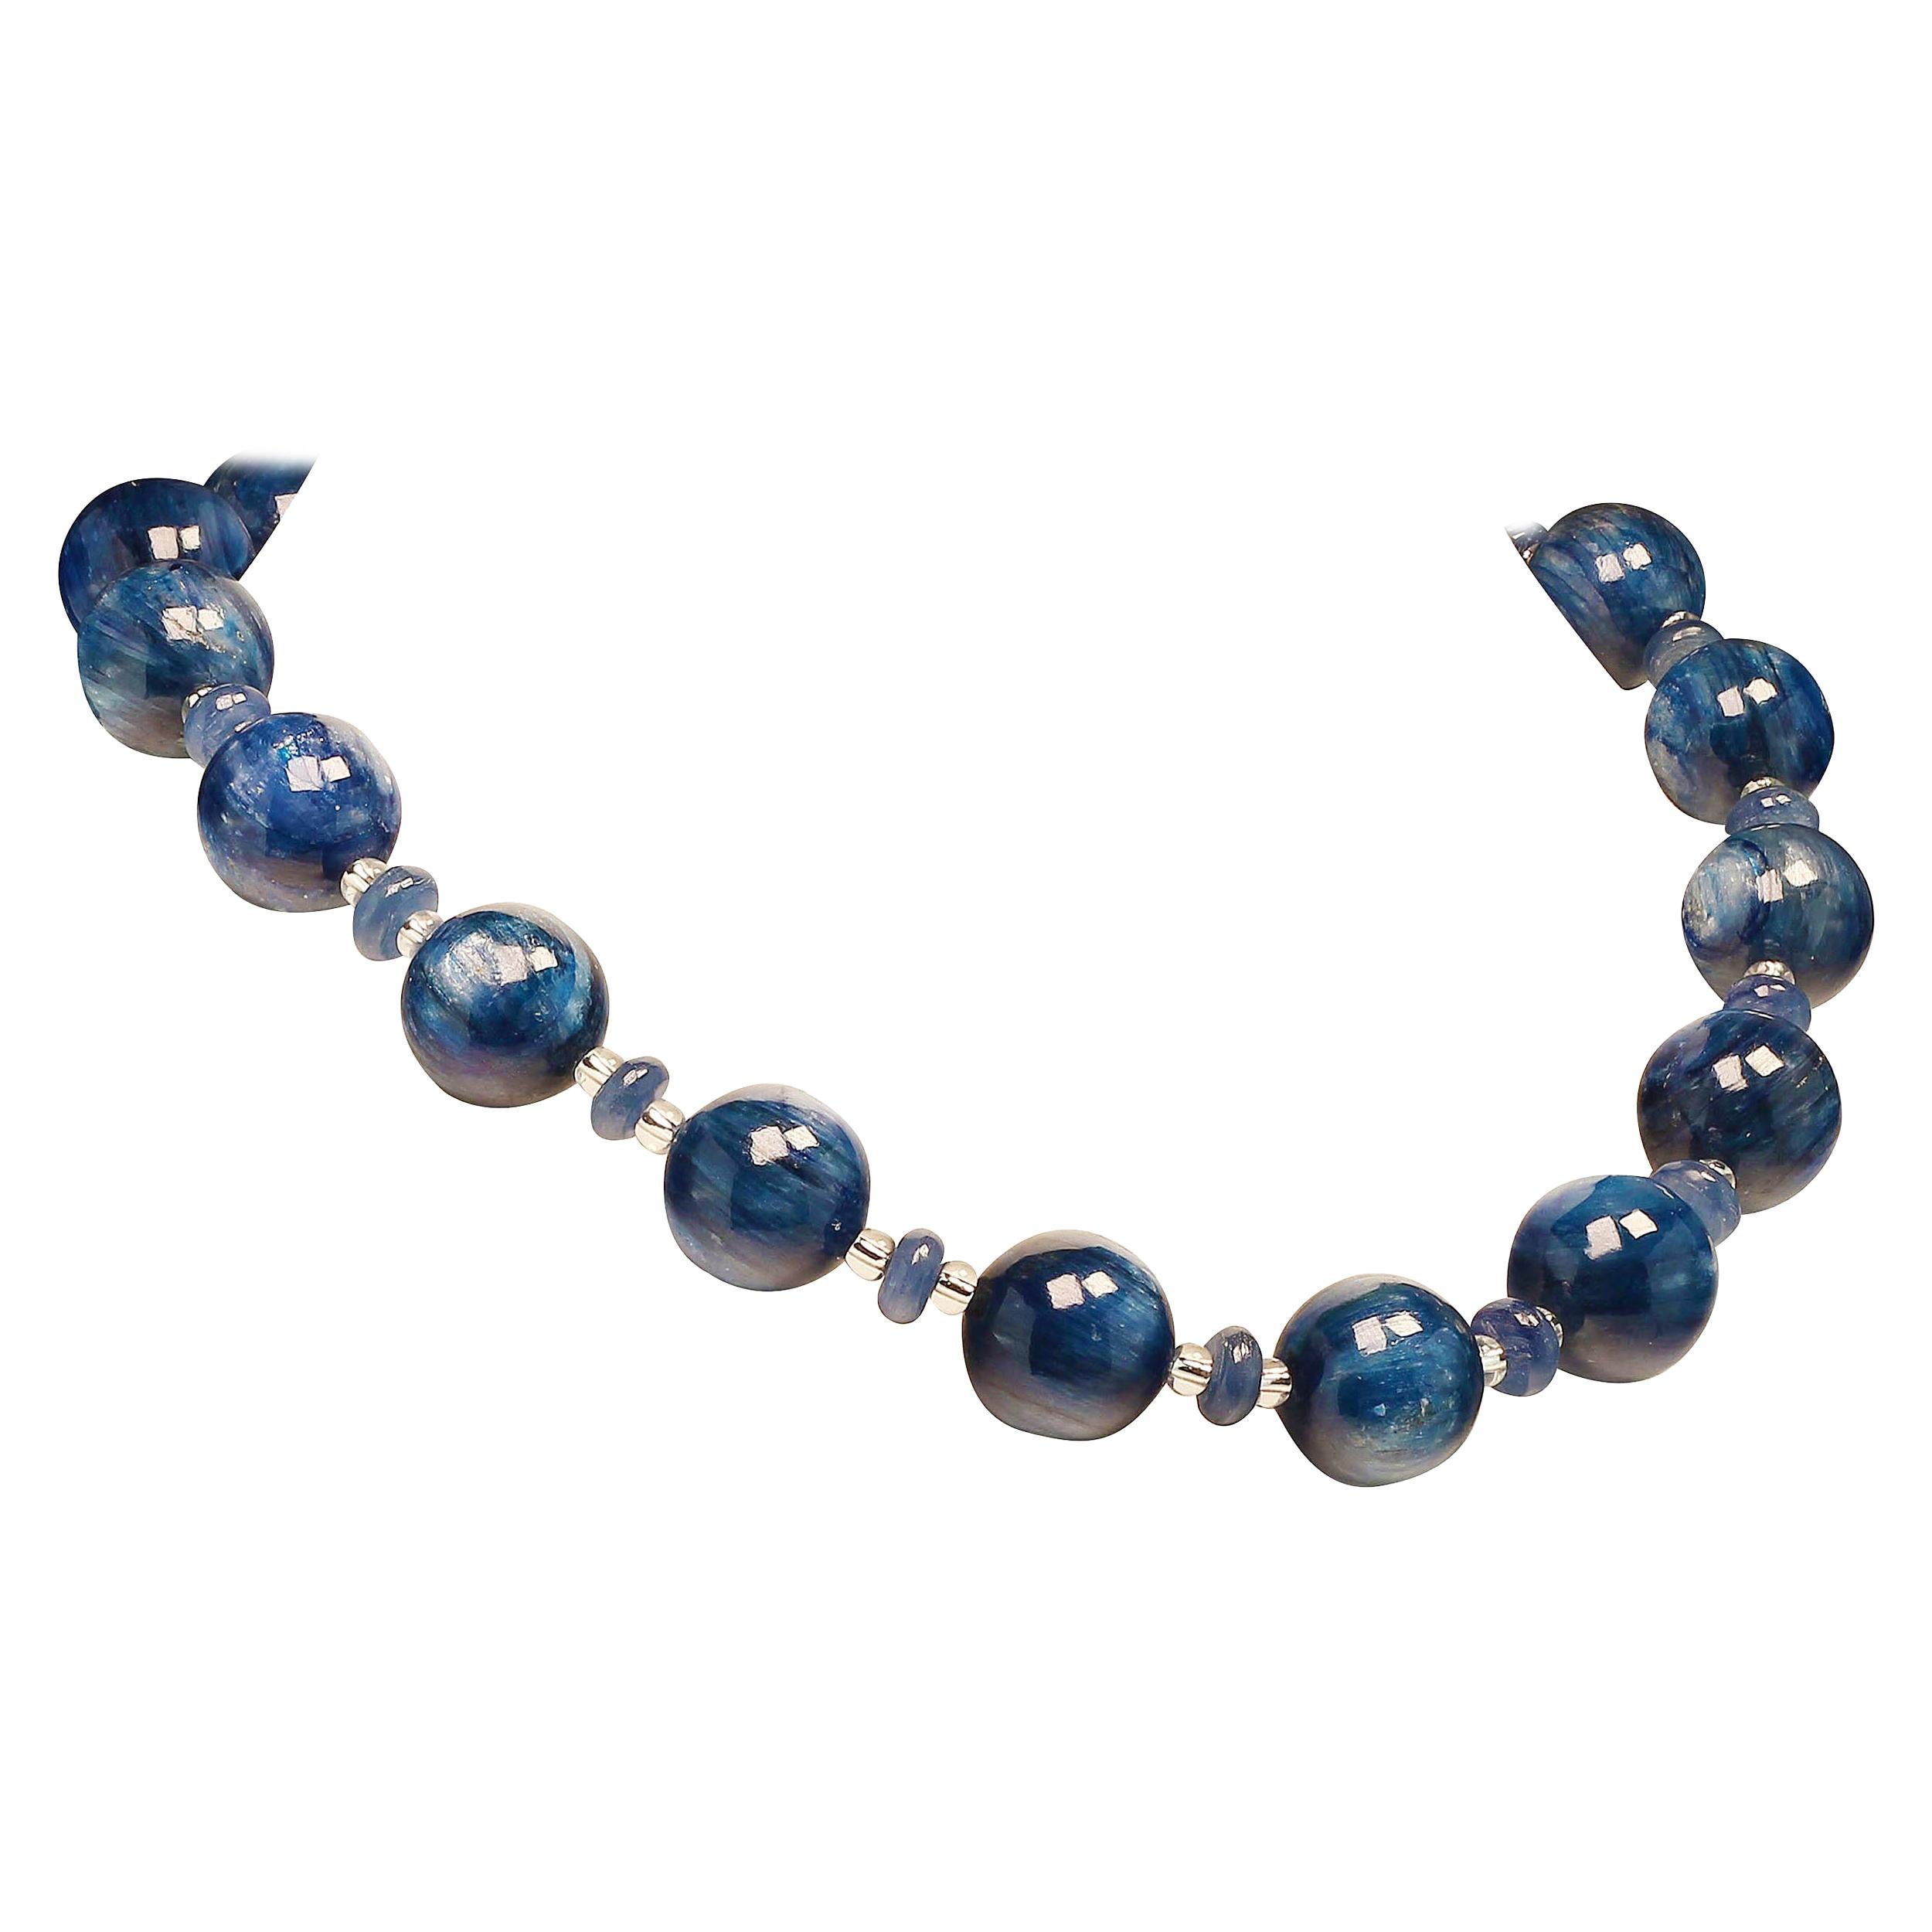 Custom made, stunning Blue Kyanite necklace of 18 MM highly polished spheres accented with Kyanite rondelles and silver Czech beads.  This unique necklace is for those who love Kyanite and love blue.  The 19 inch necklace is secured with a Sterling